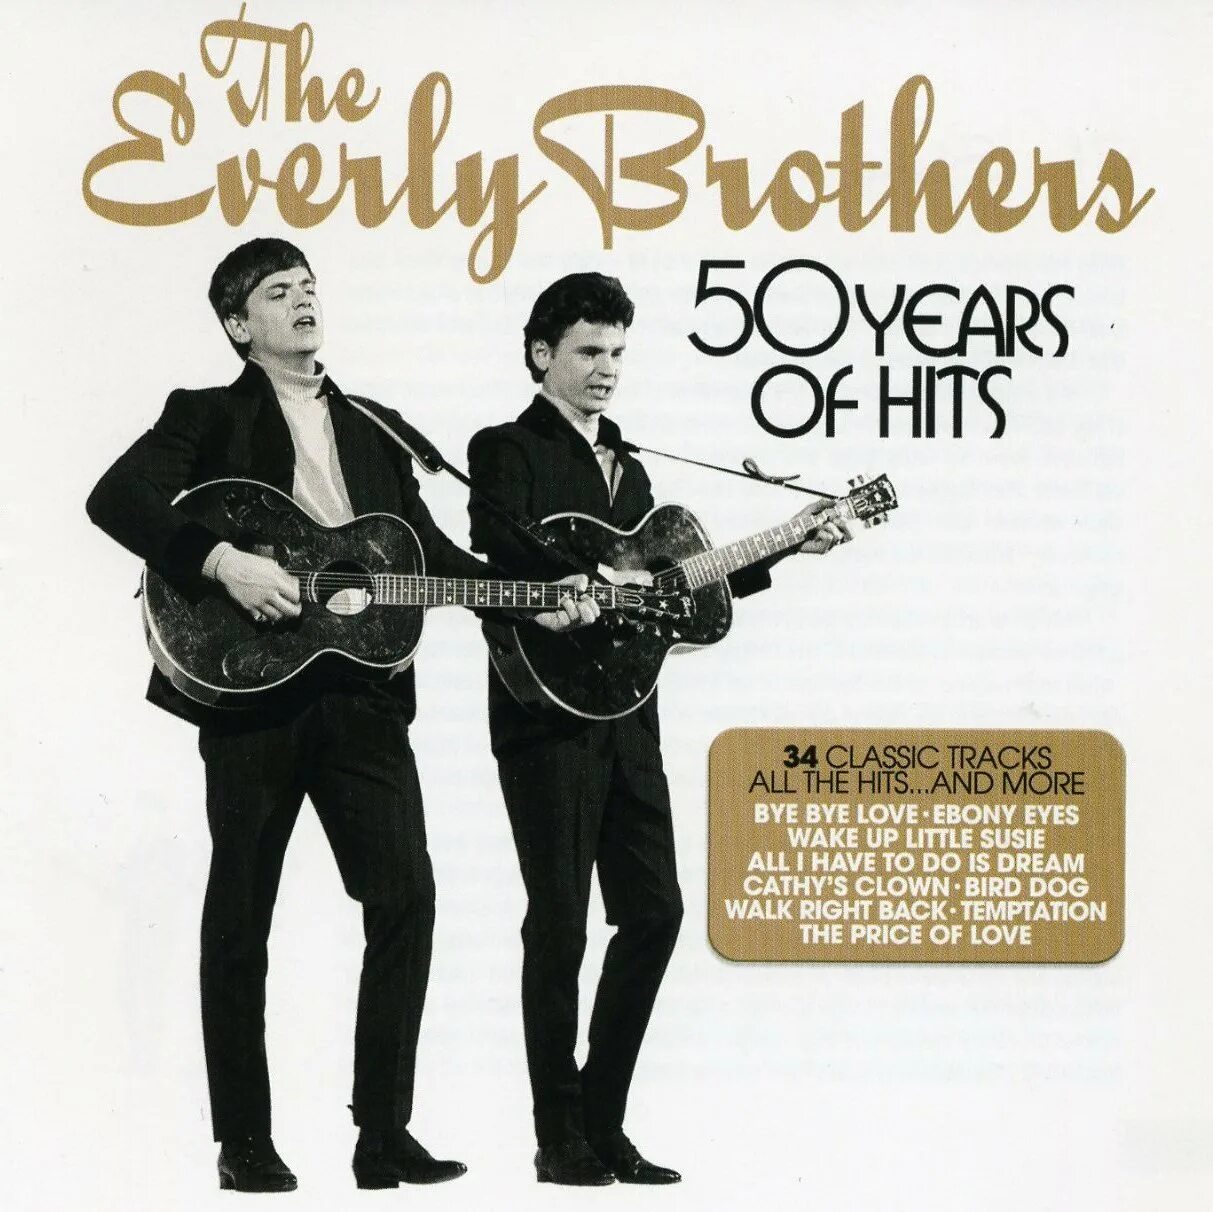 Everly brothers. The Everly brothers американский дуэт. Everly brothers – 50 years of Hits. The Everly brothers - обложка.